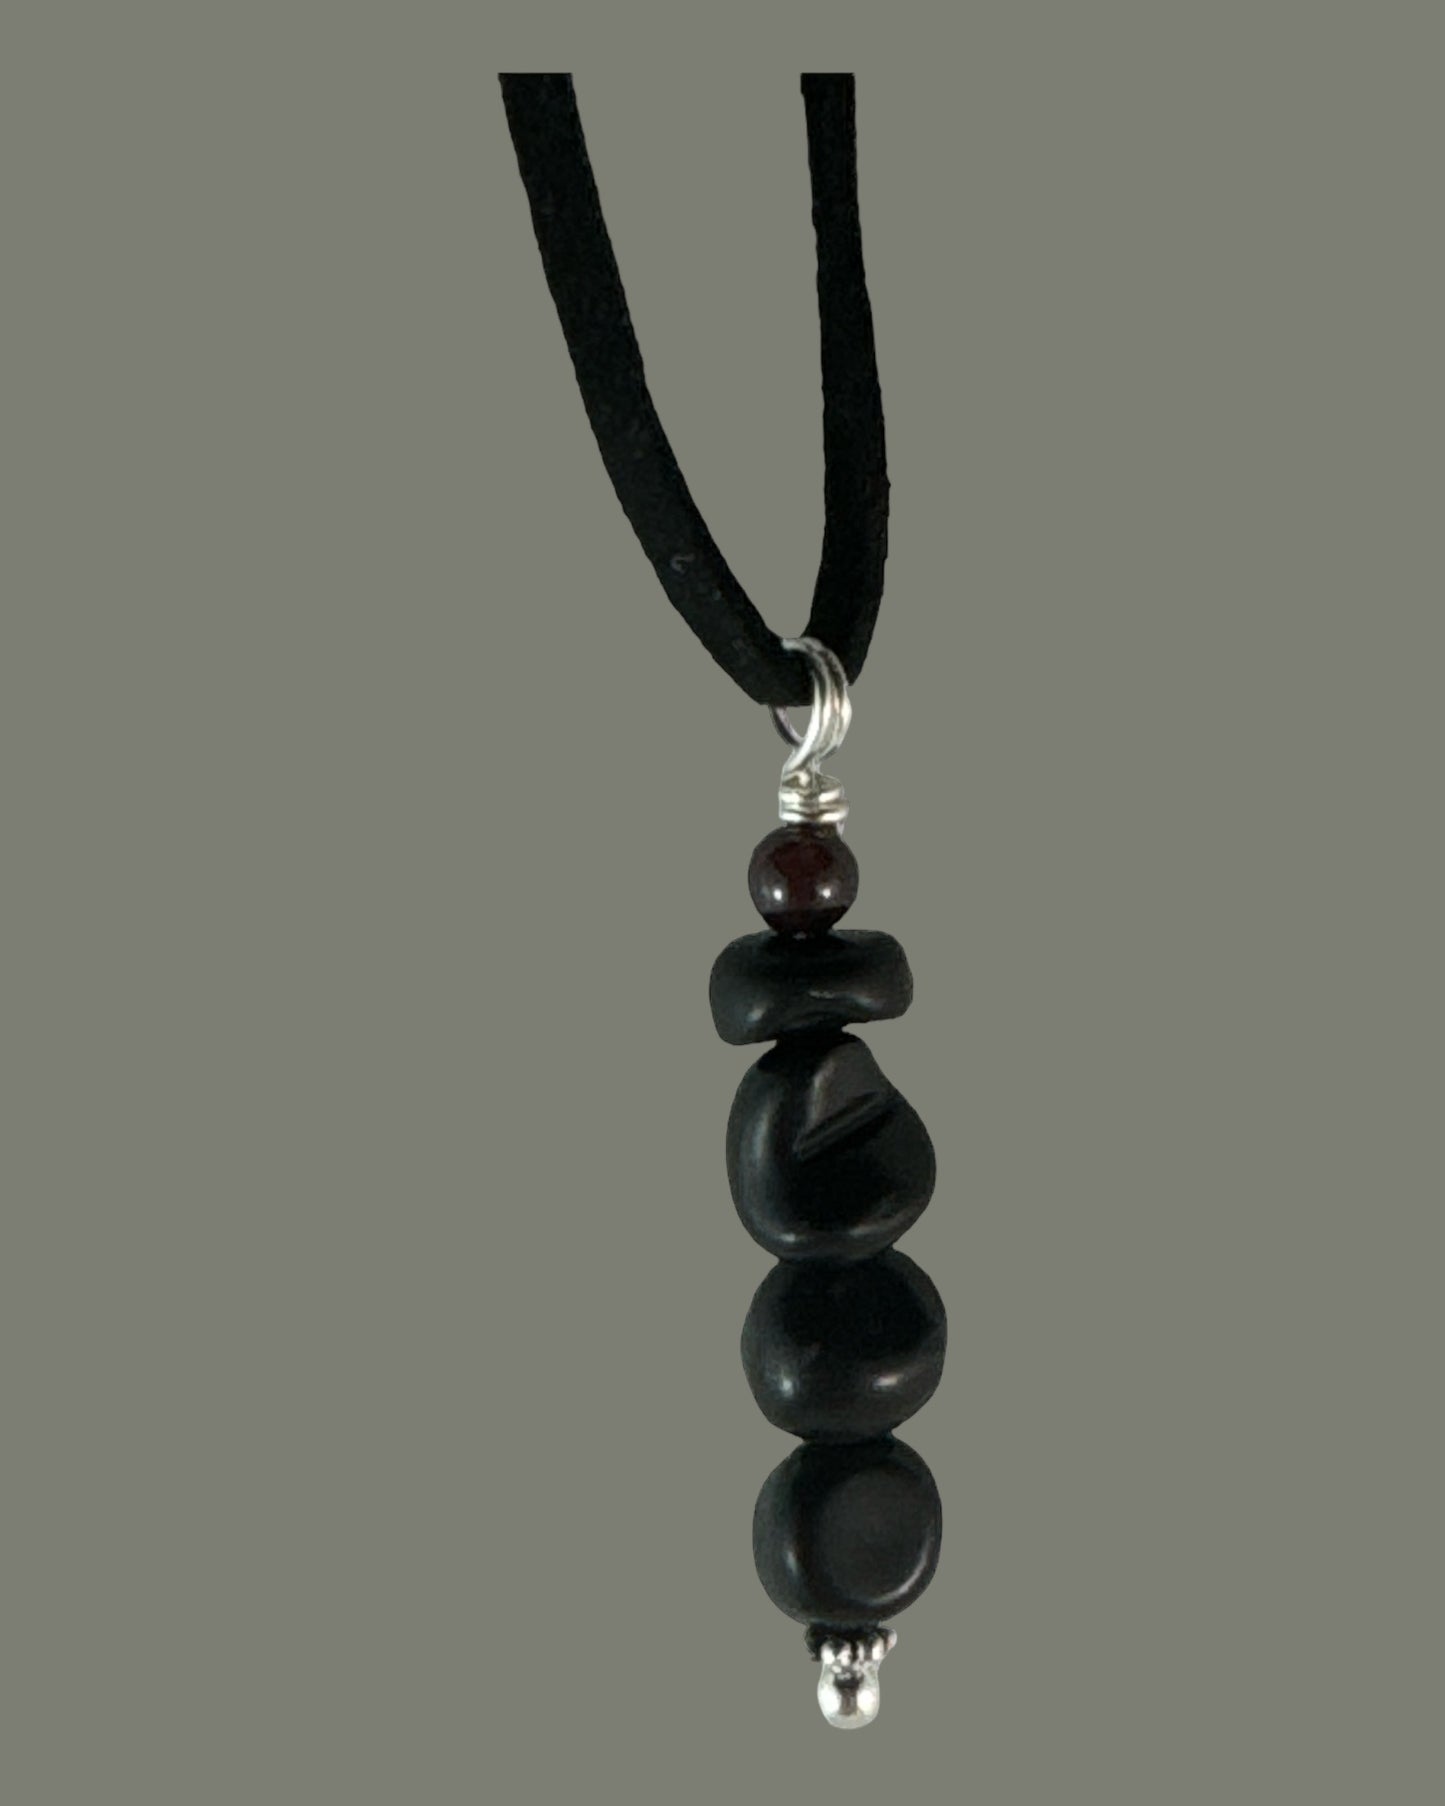 Shungite pendant (tumbled vertical drop paired with Garnet)